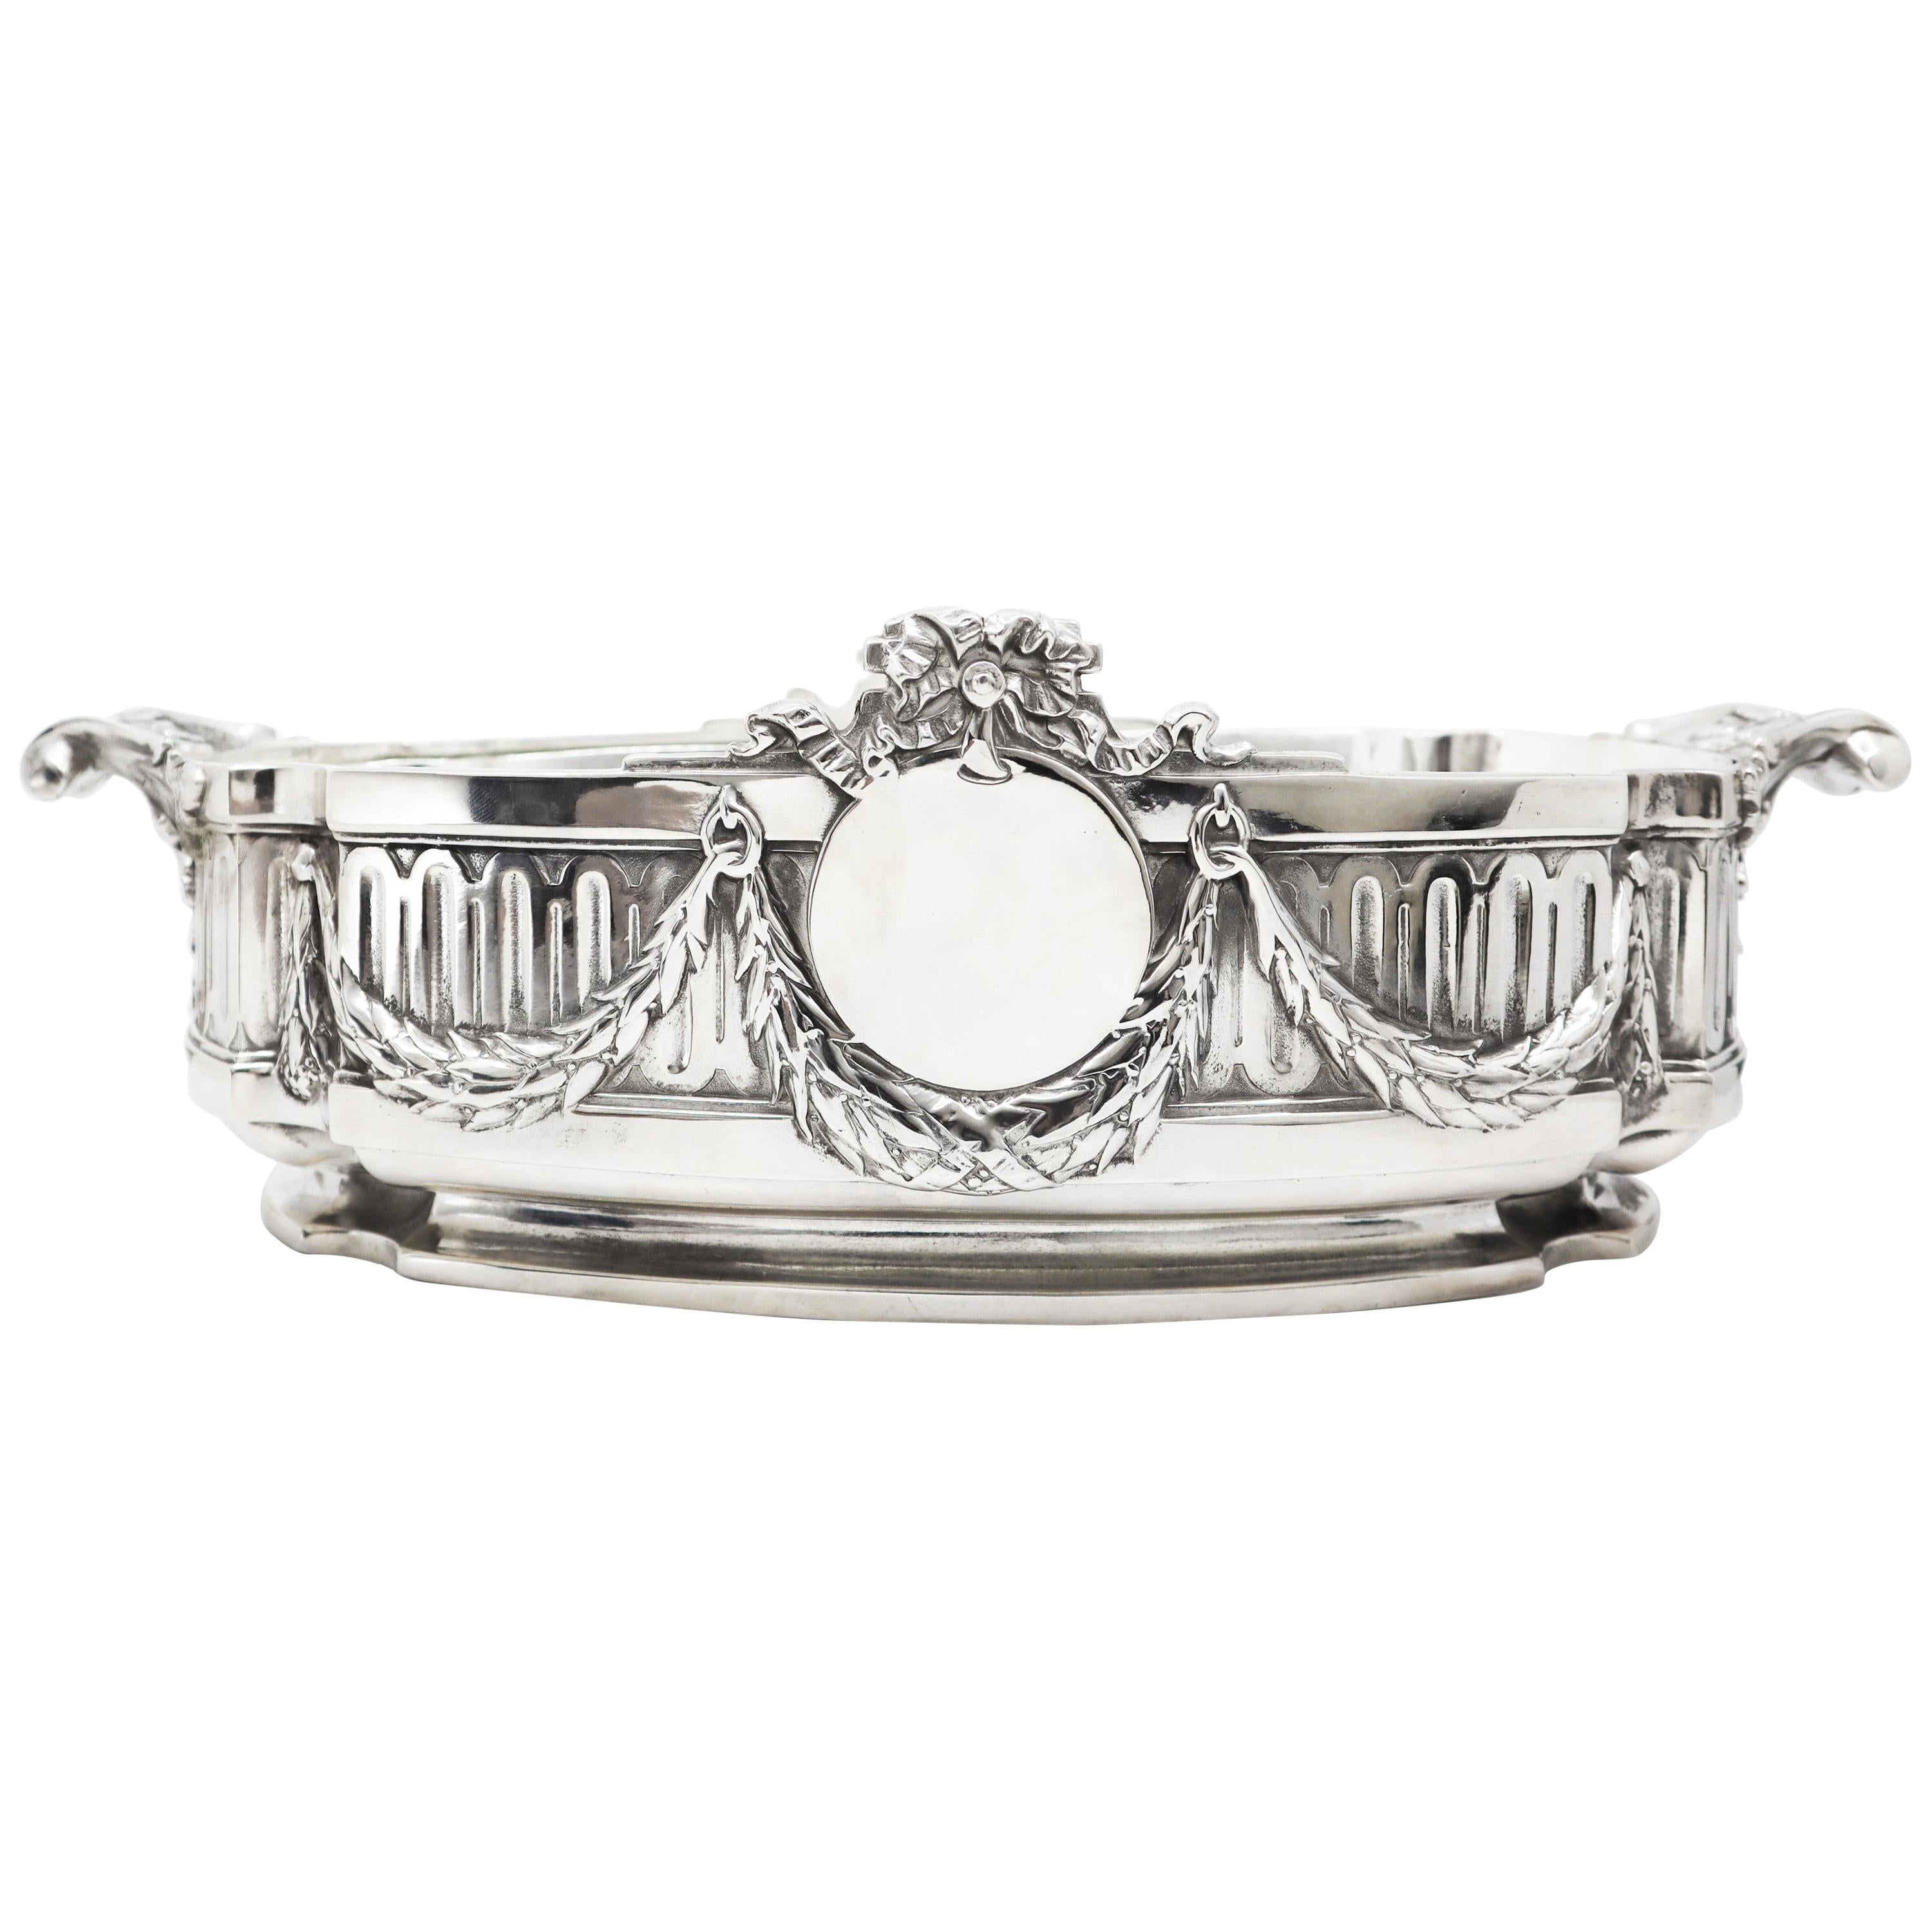 Silver Plated Jardinière, Late 19th Century French For Sale